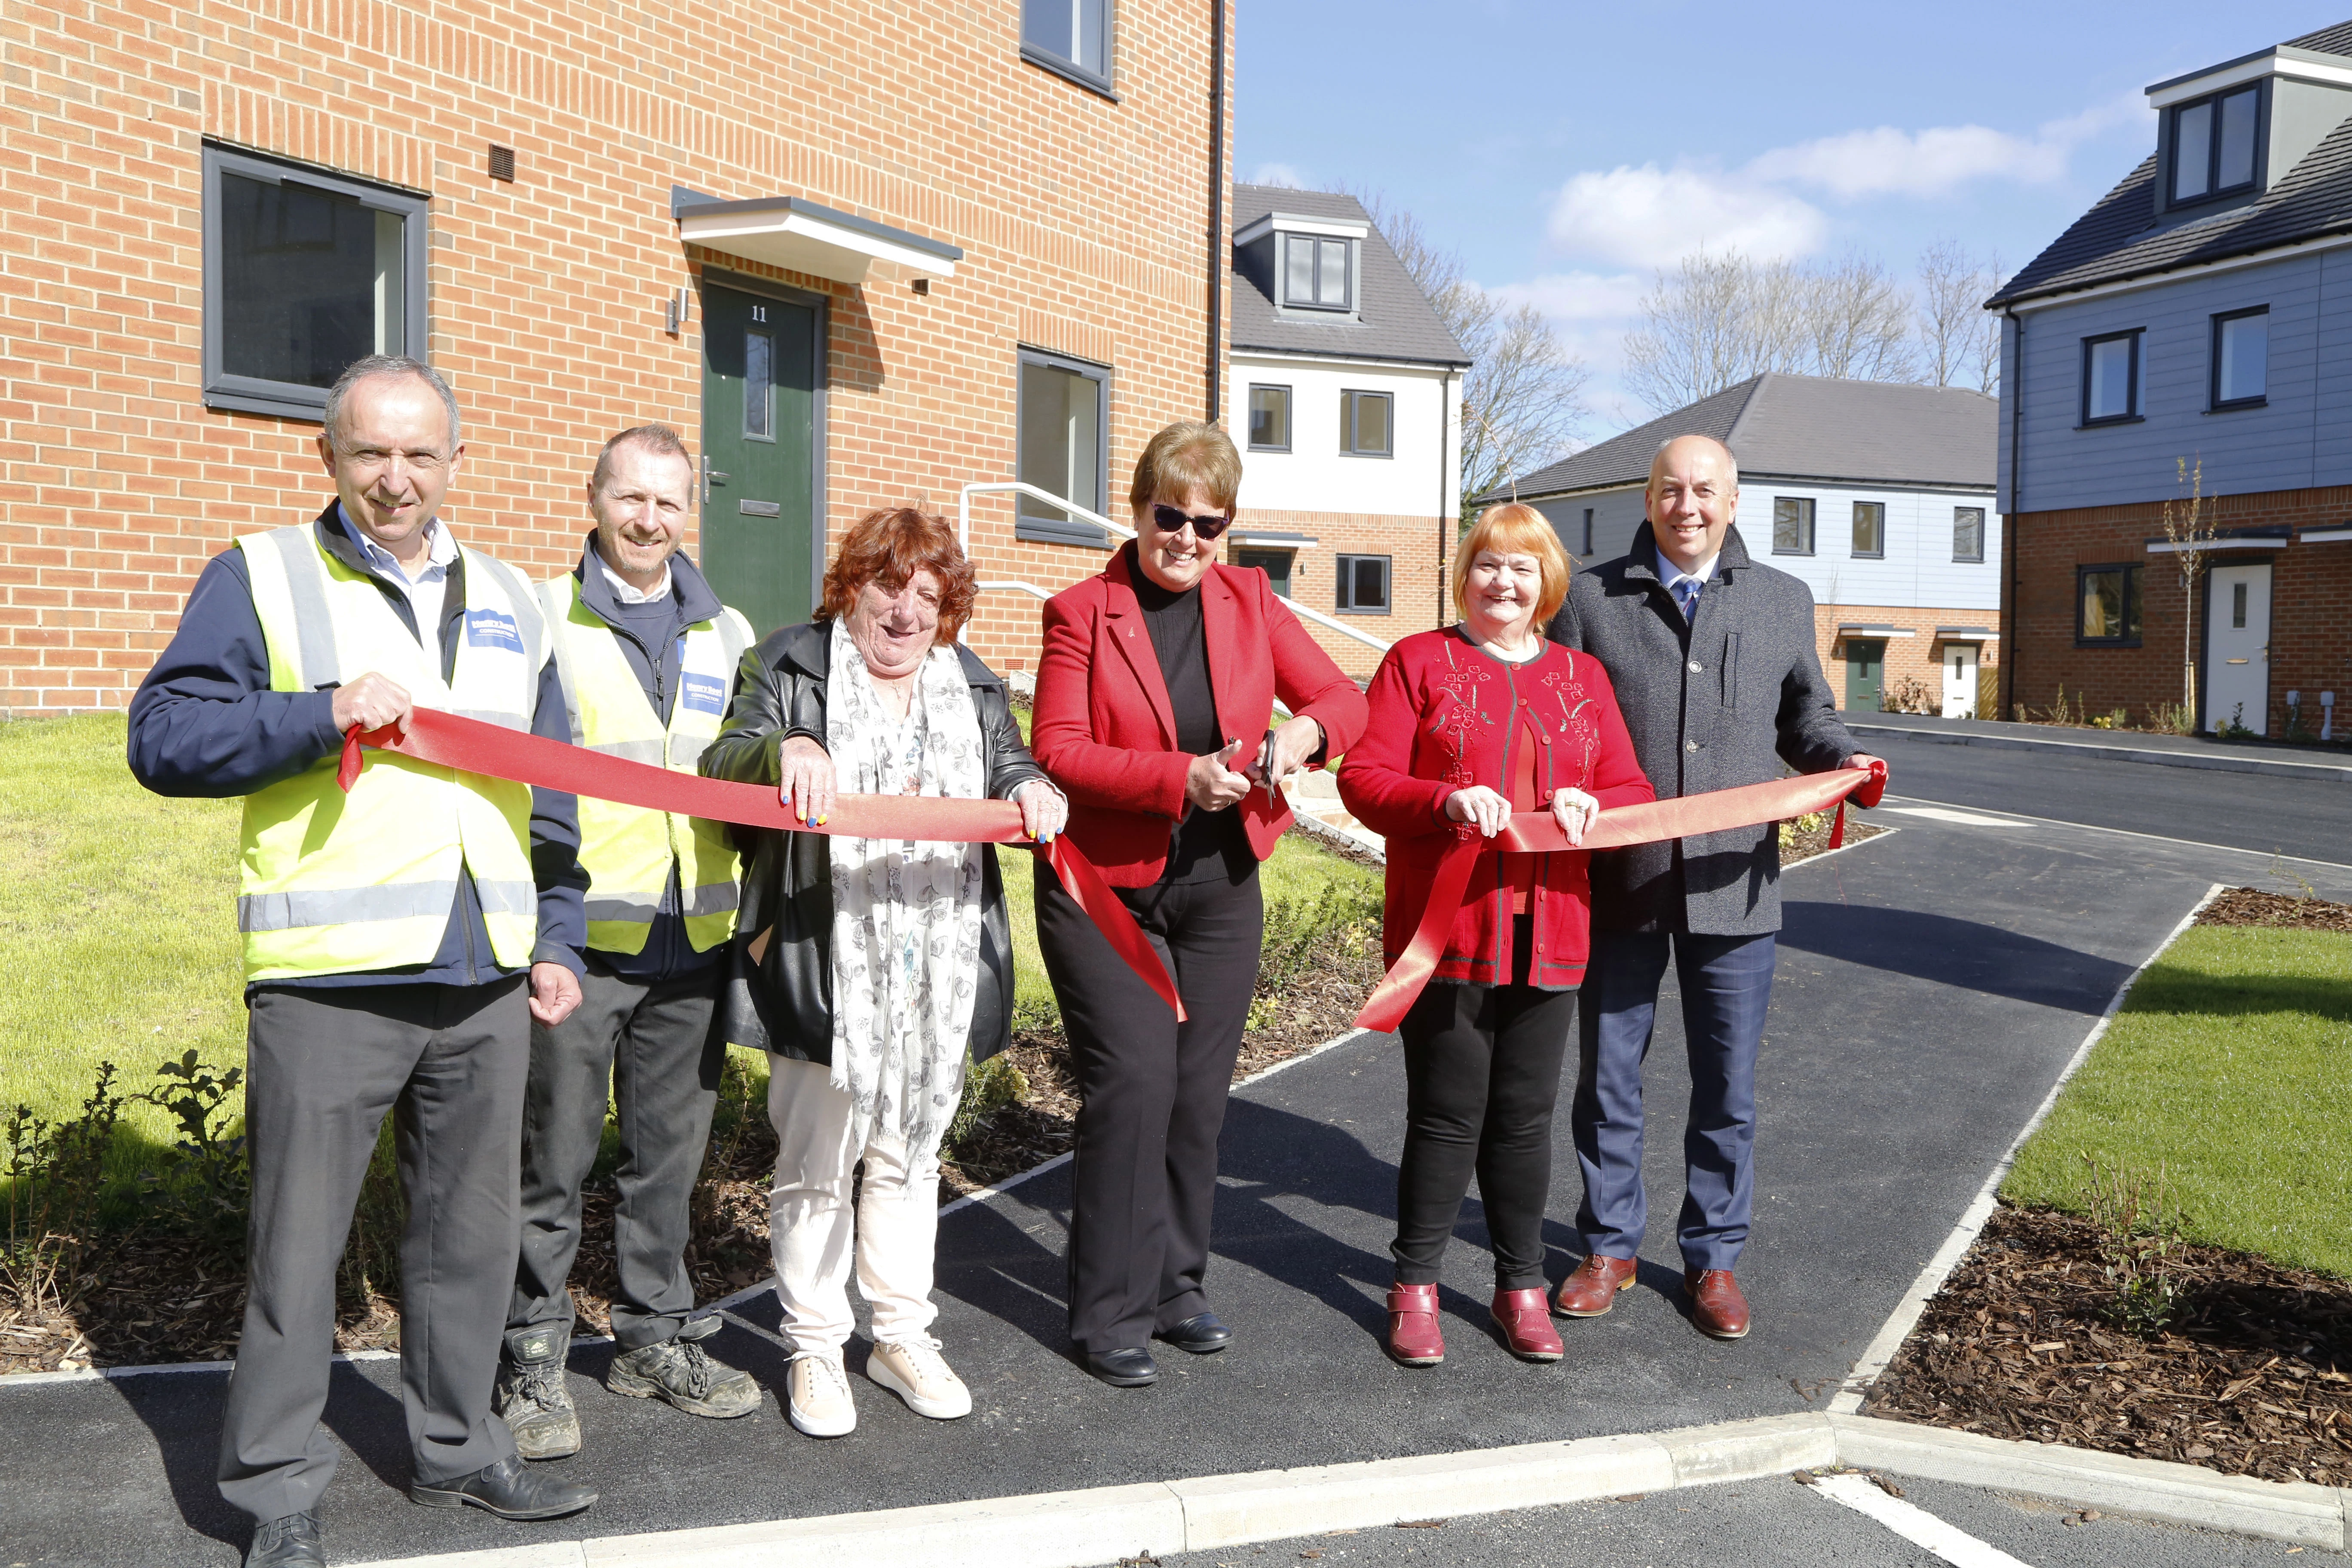 Gary Holmes and Graham Johnson from Henry Boot, Cllr Avis Murphy, Leader Chesterfield BC Cllr Tricia Gilby, Cllr Chris Ludlow and Huw Bowen Chesterfield Council chief exec.at the Badger Croft development